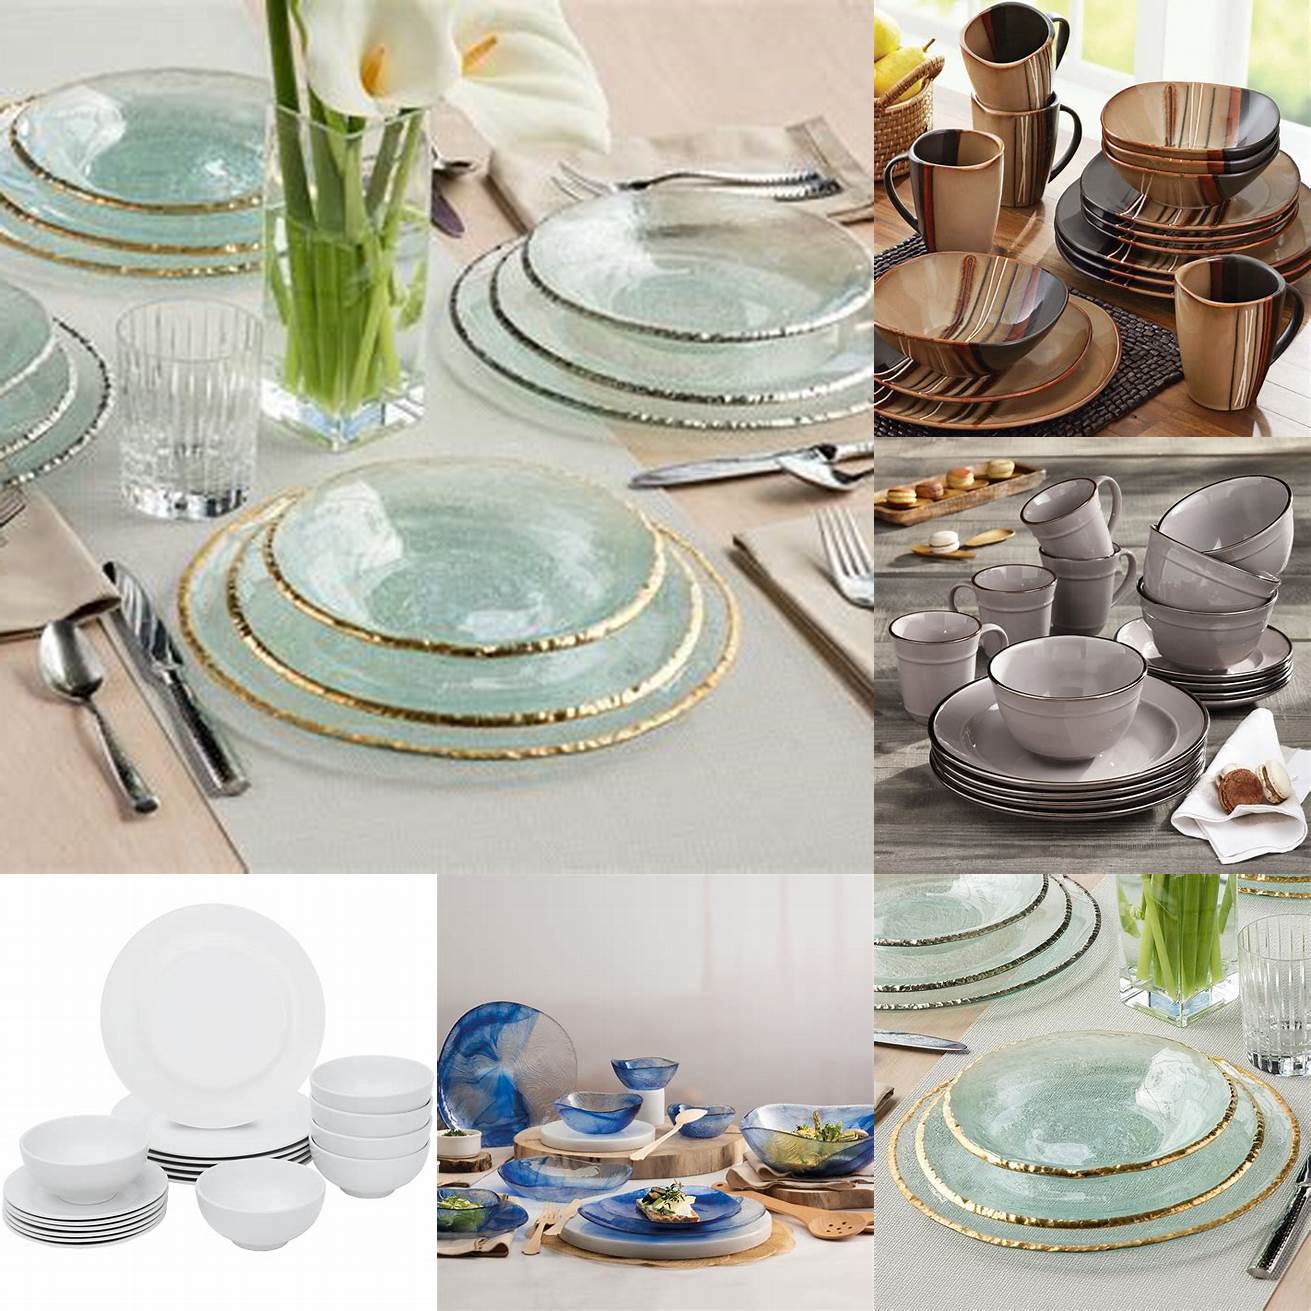 Tableware Stylish plates glasses and utensils can elevate any dining experience